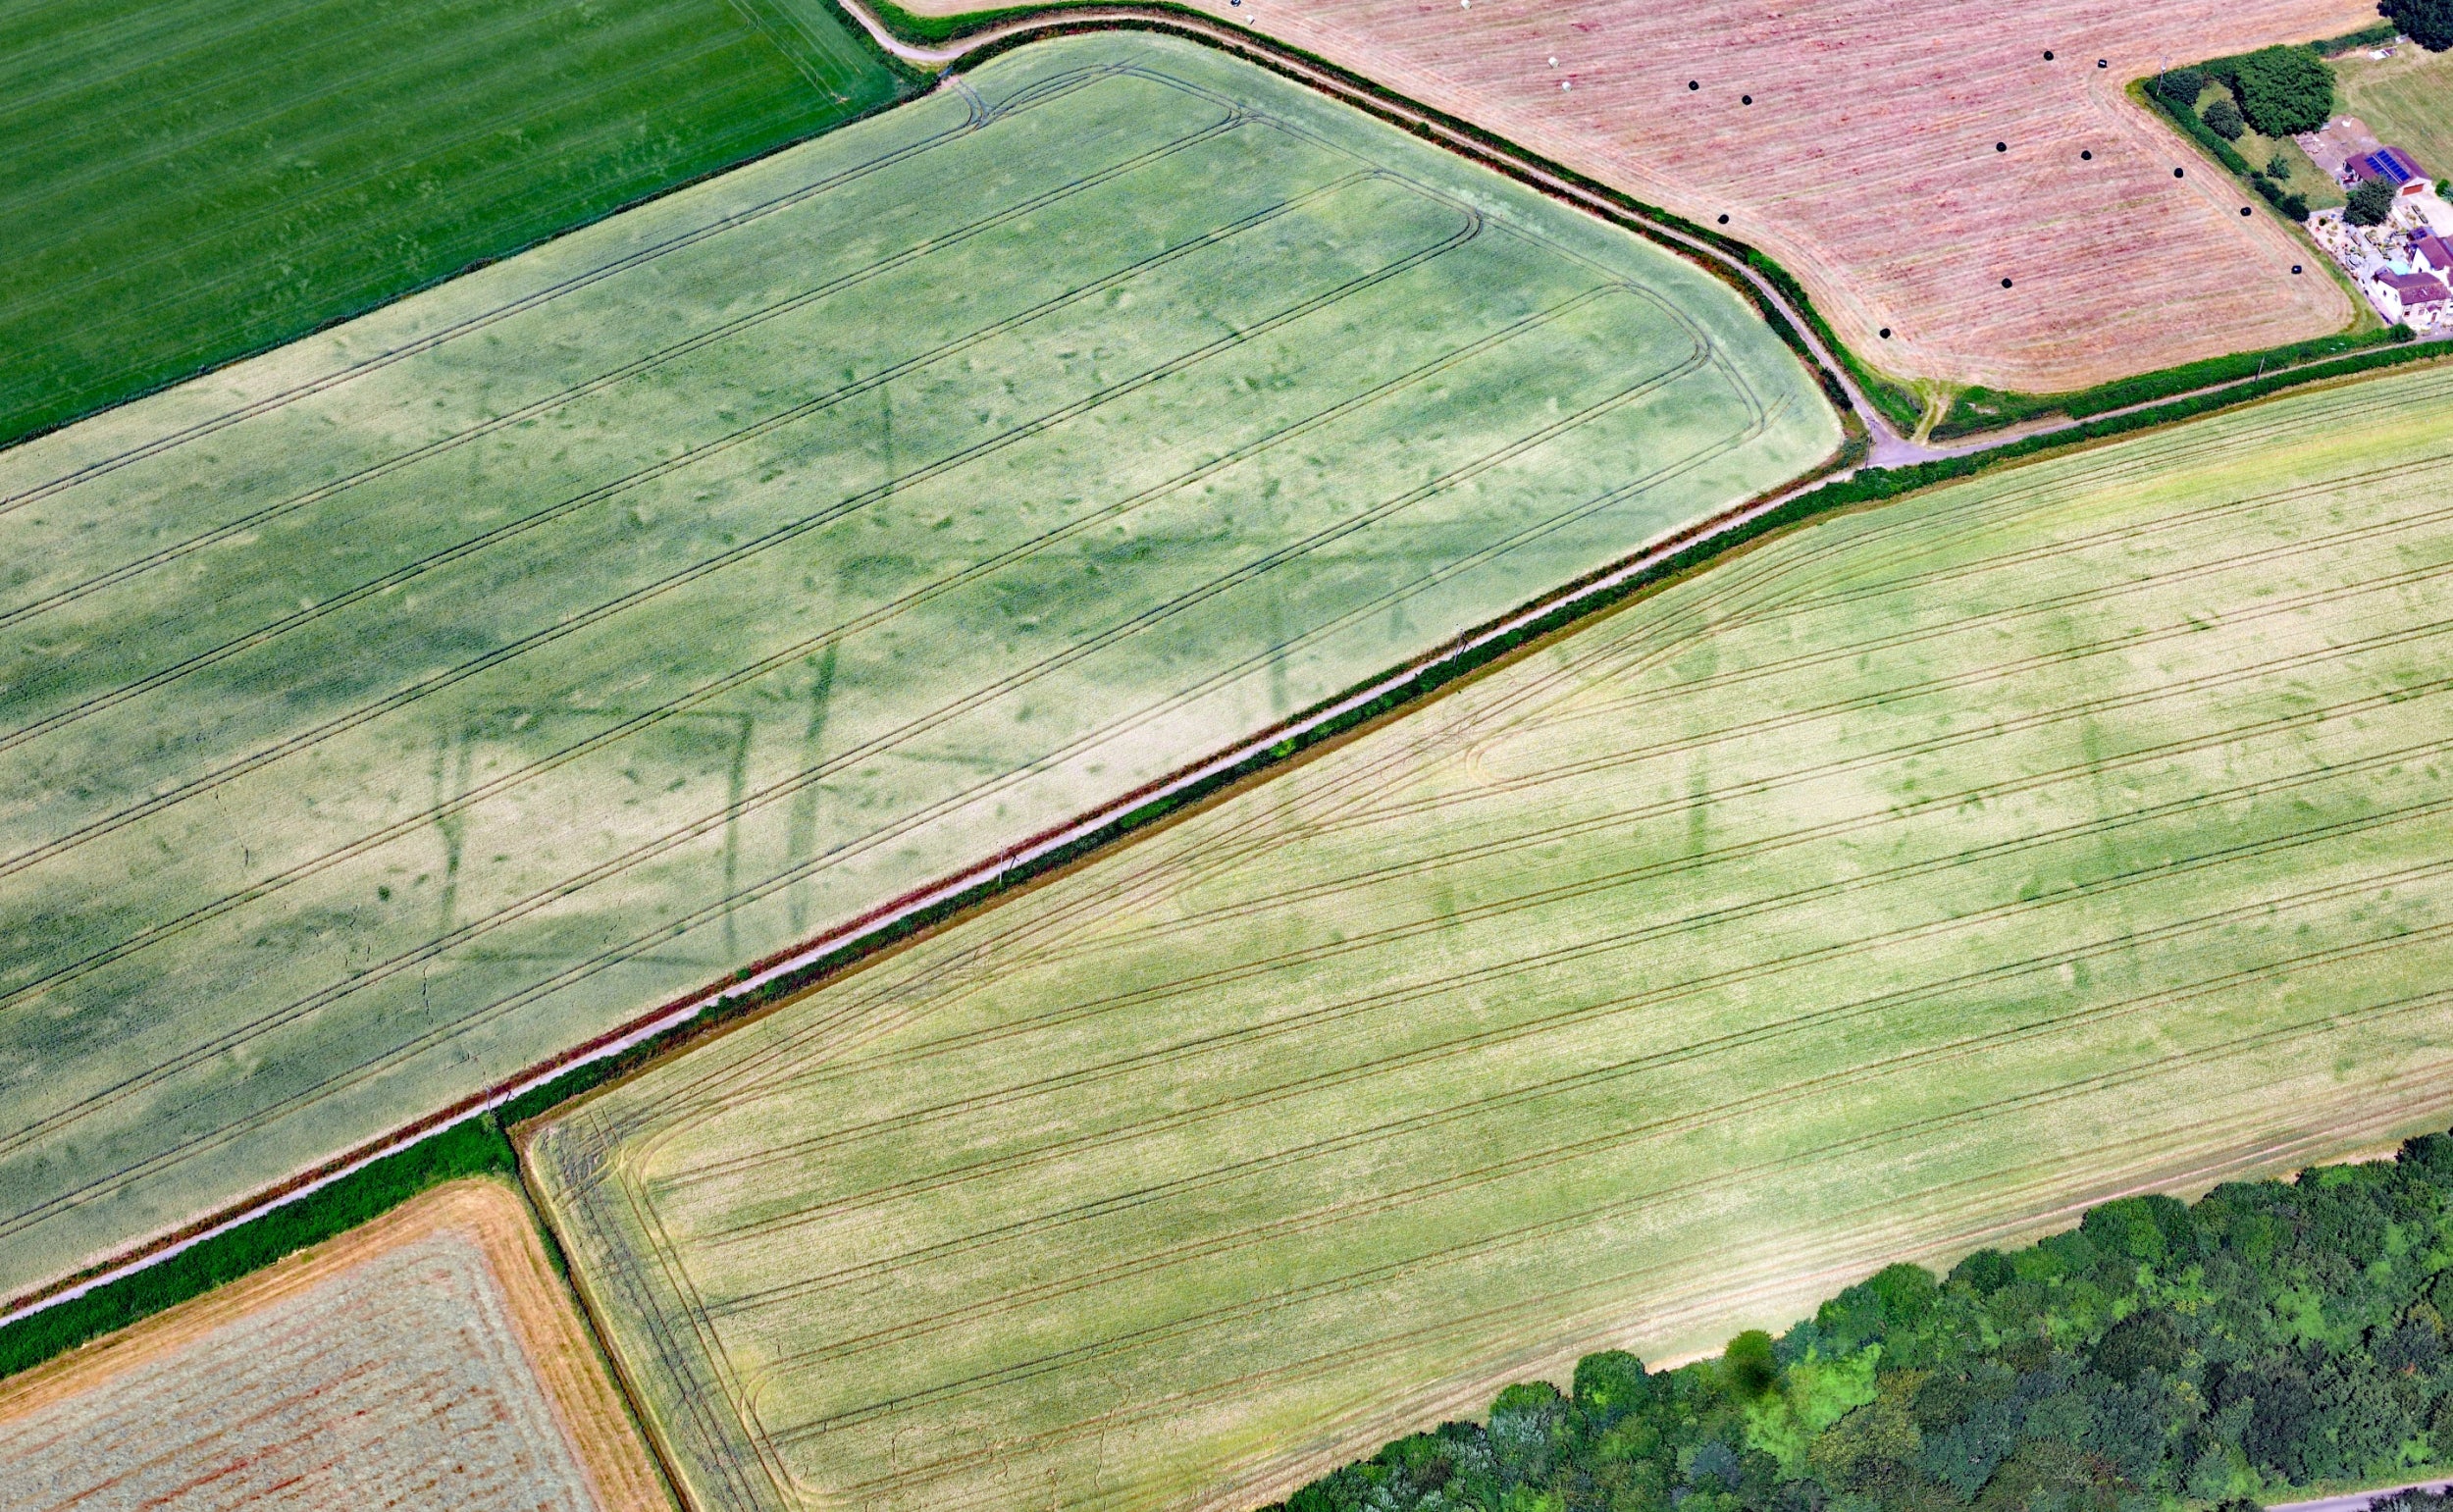 Outlines of a first century town, a 'ghost garden' from the 1850s and an undiscovered Roman site are all appearing across the British countryside as record temperatures scorch the UK's fields and hillsides (SWNS)